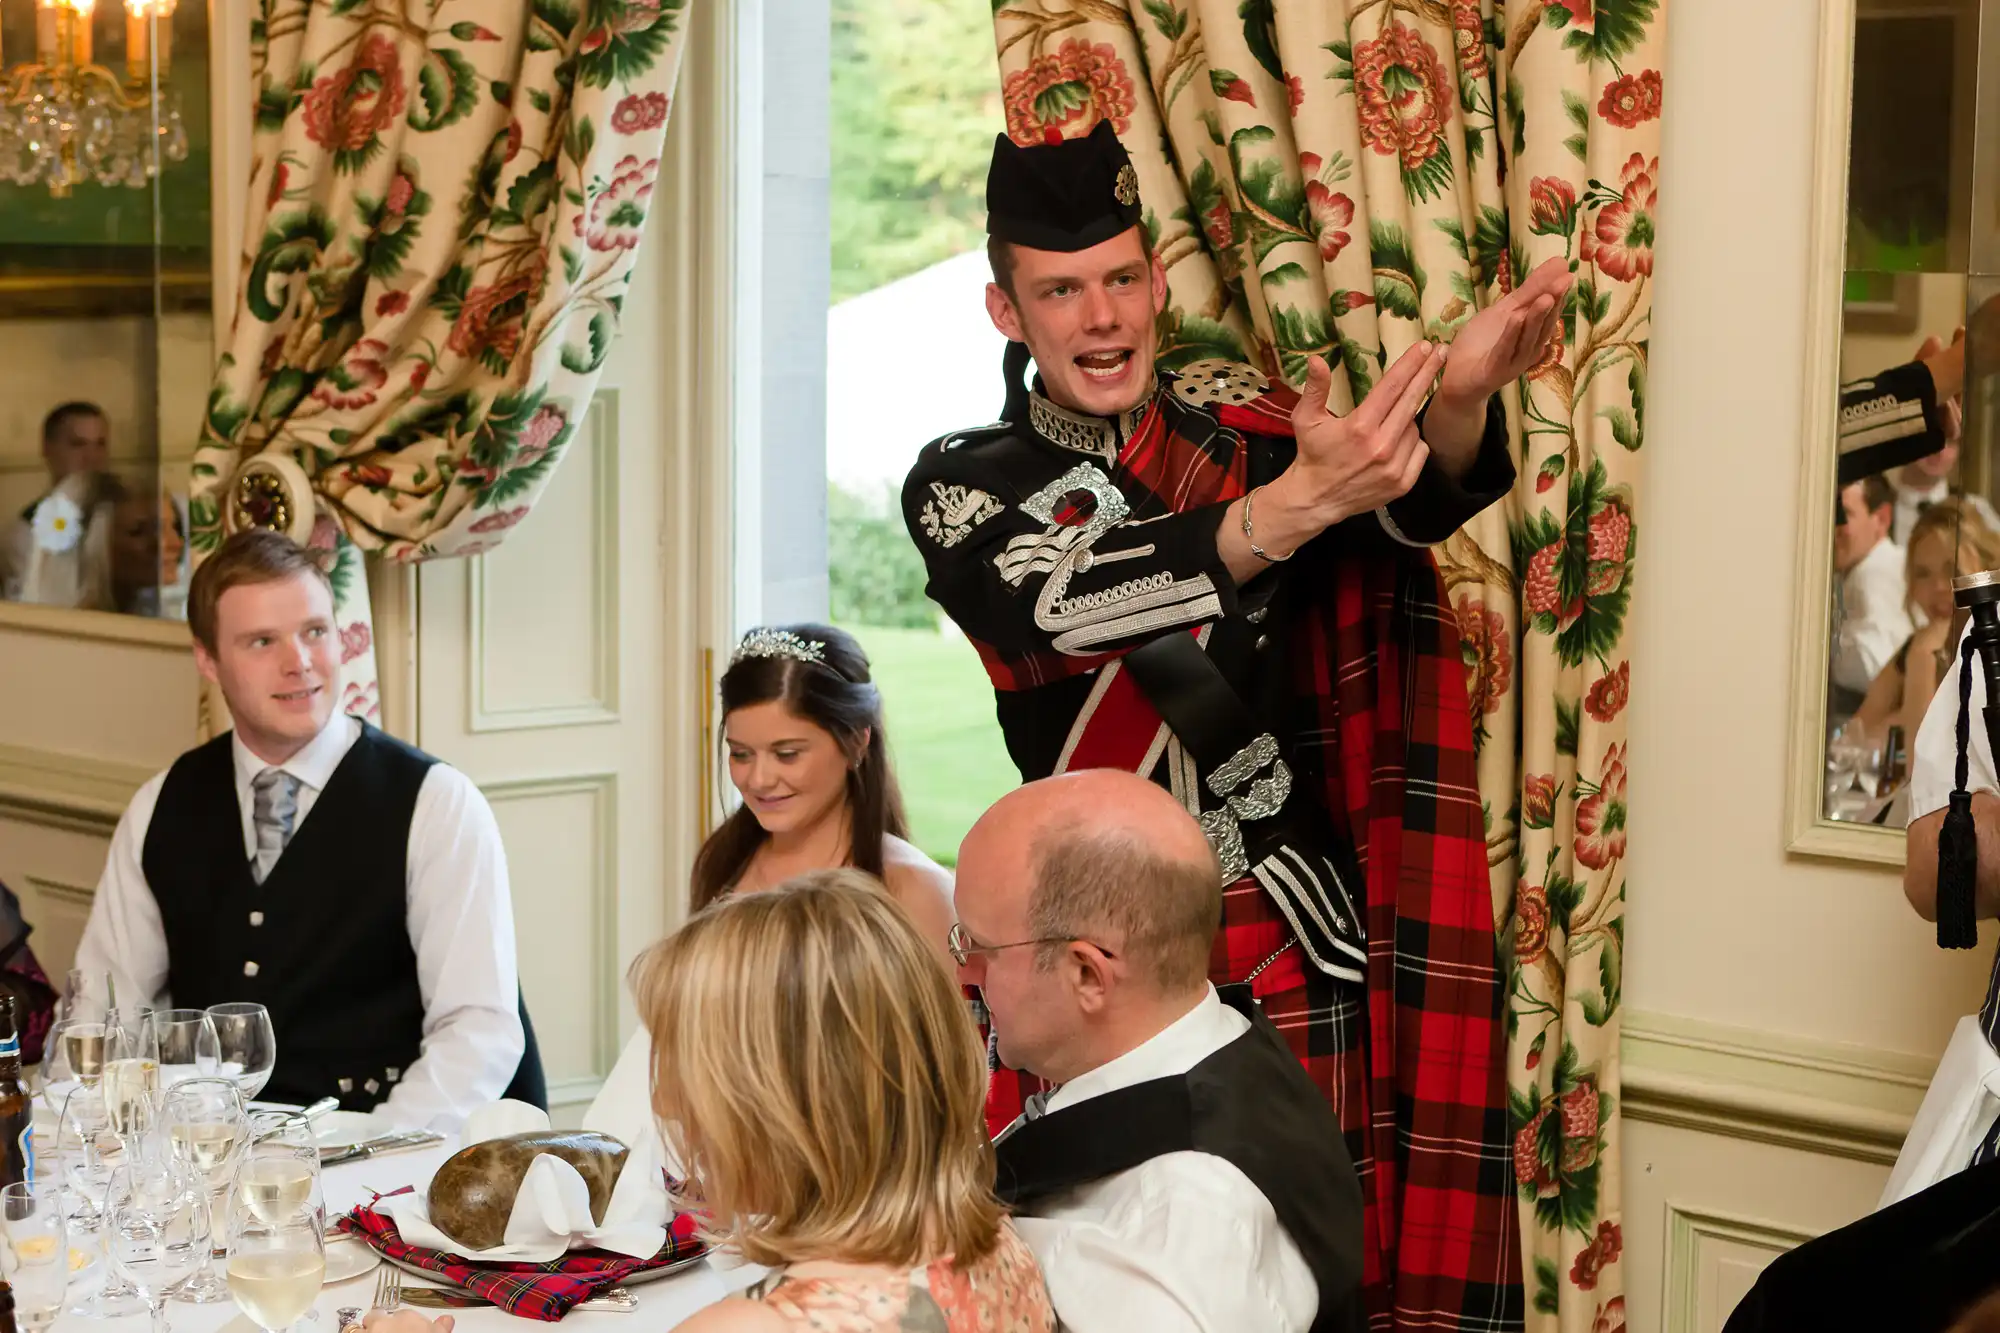 A man in traditional scottish attire presenting a haggis at a formal dining event, with guests watching in the background.